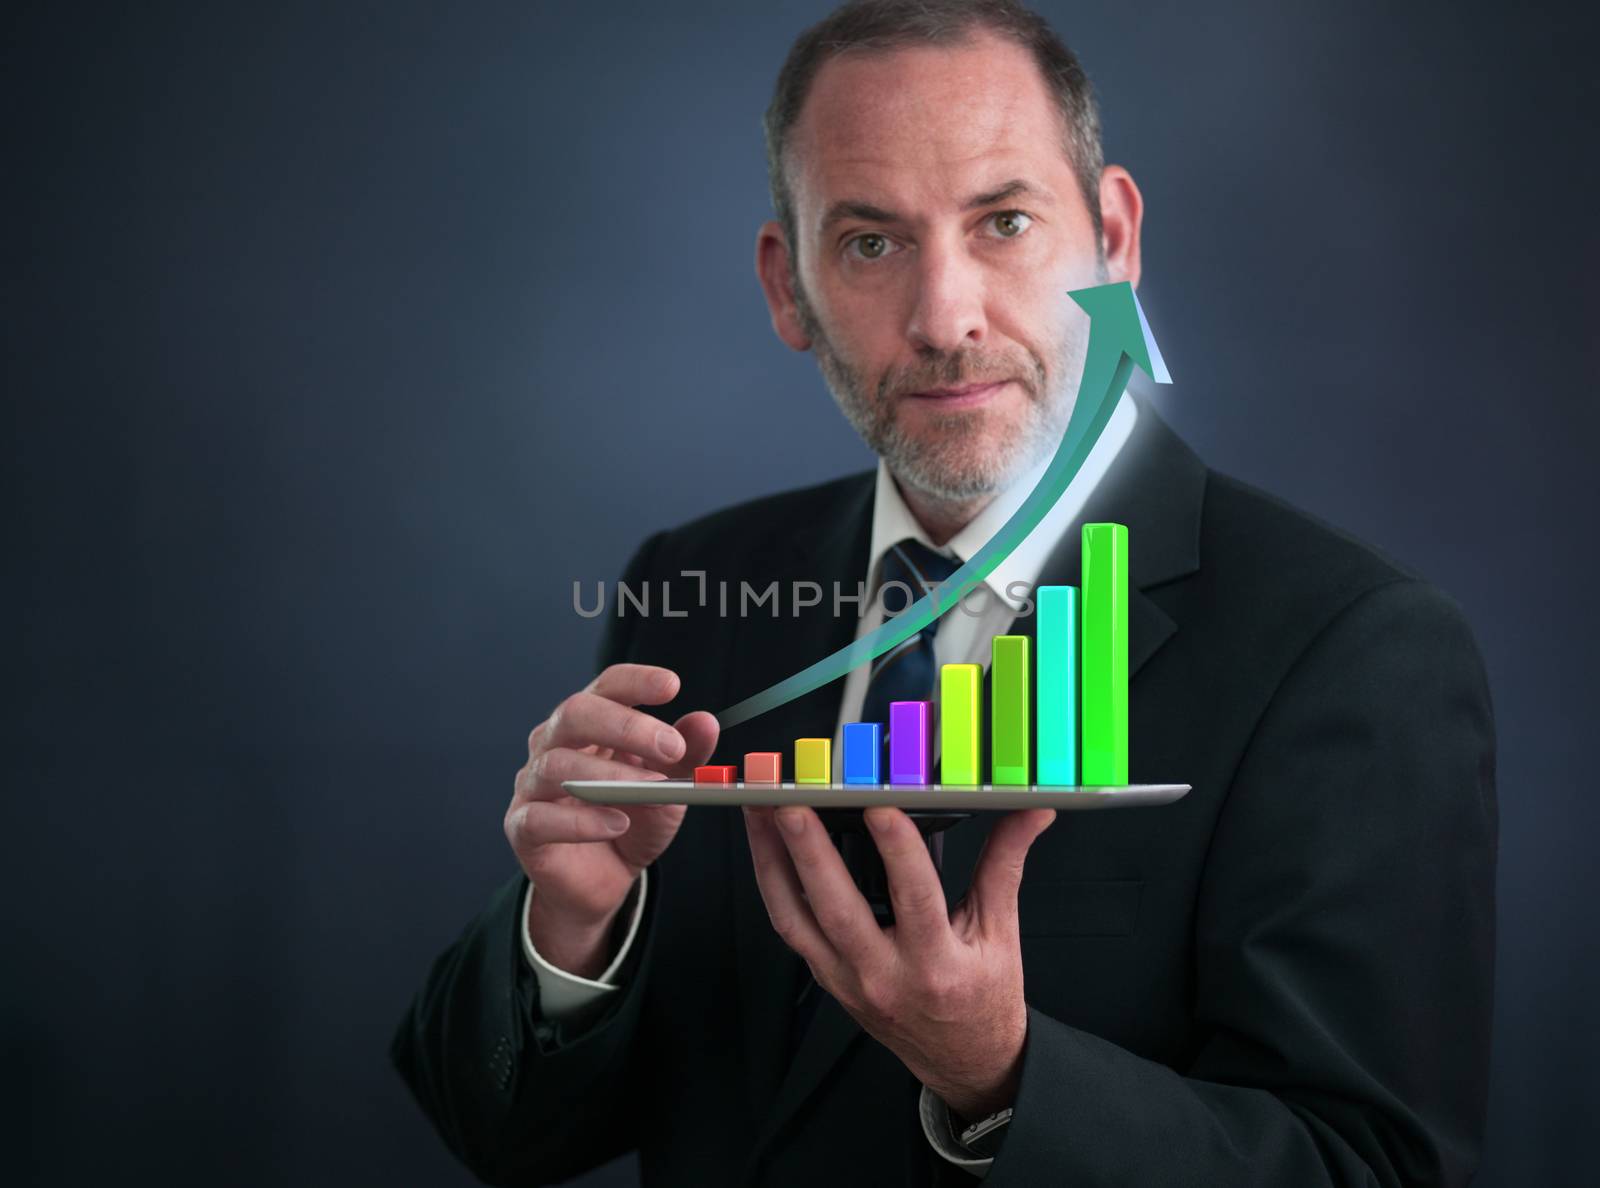 Businessman with Tablet Pc shows an analysis tool graph